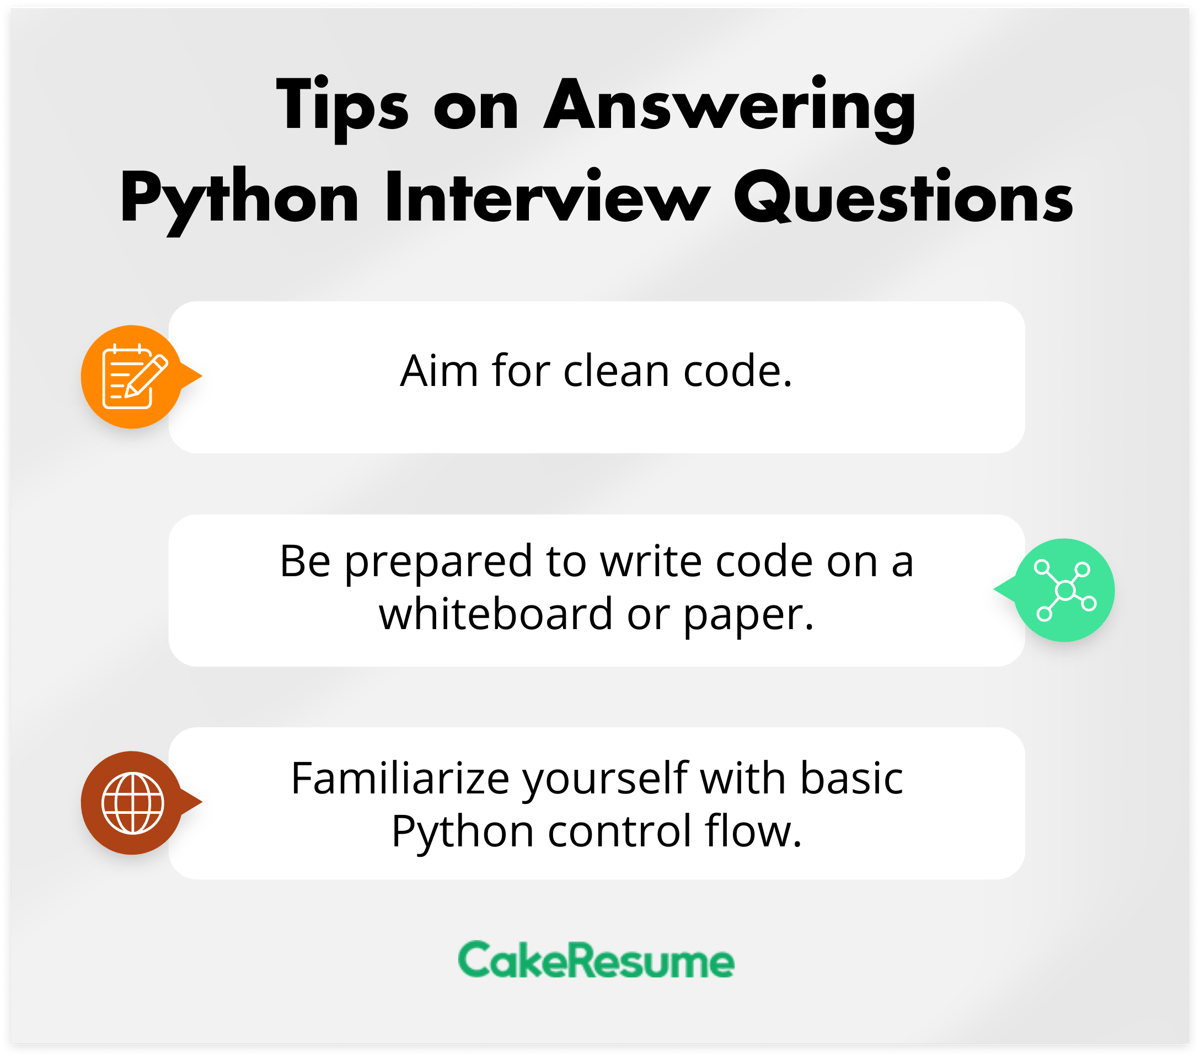 tips for answering Python interview questions